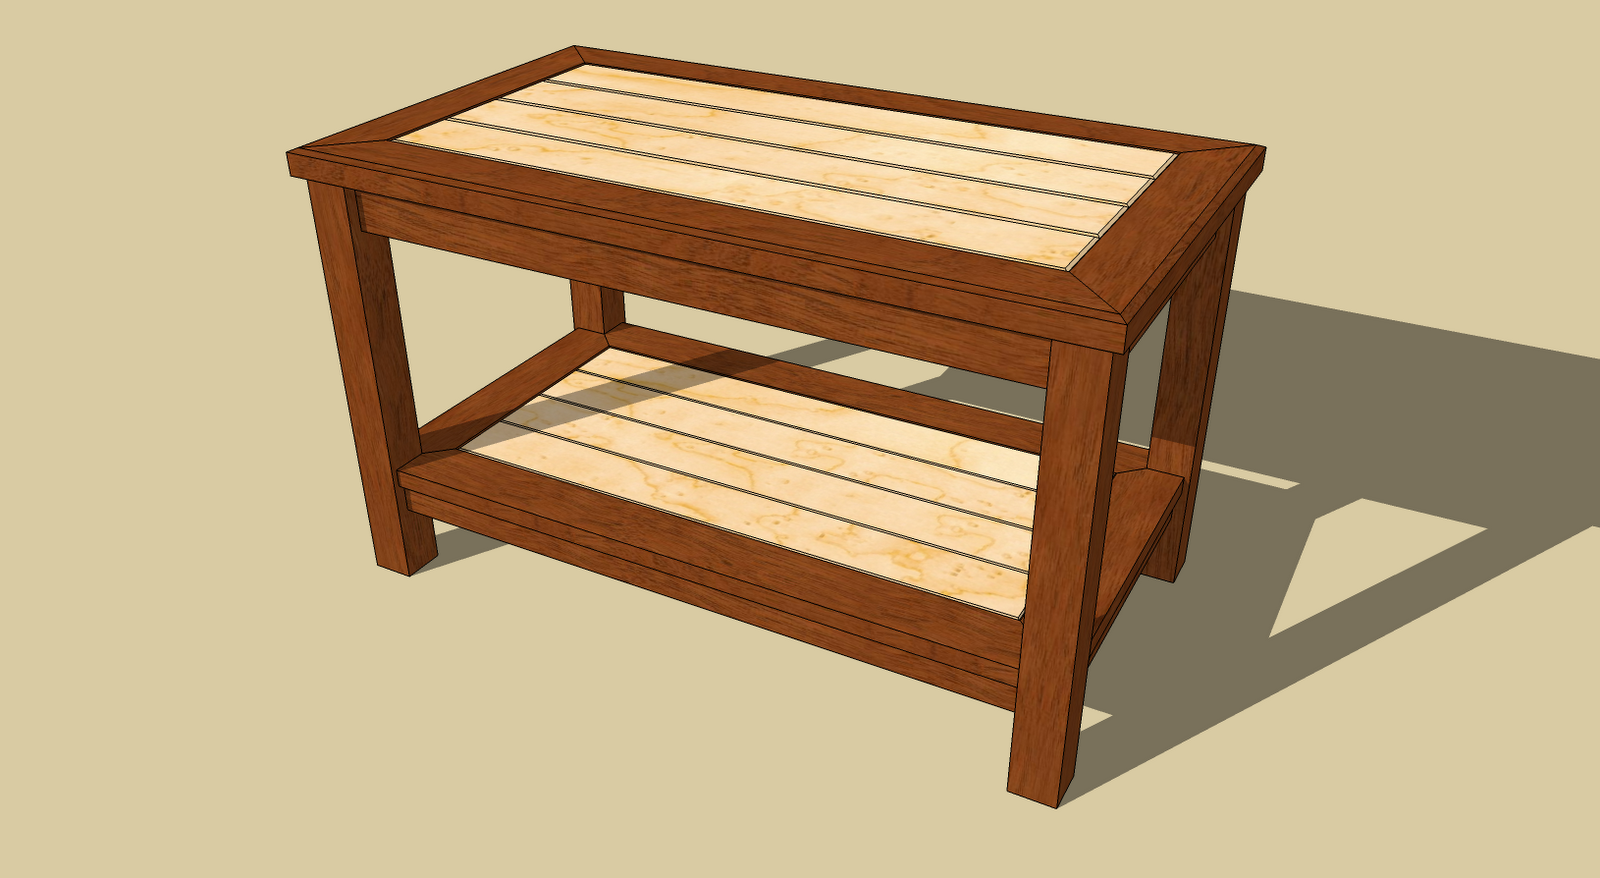 Woodworking Project Plans - DIY Woodworking Projects